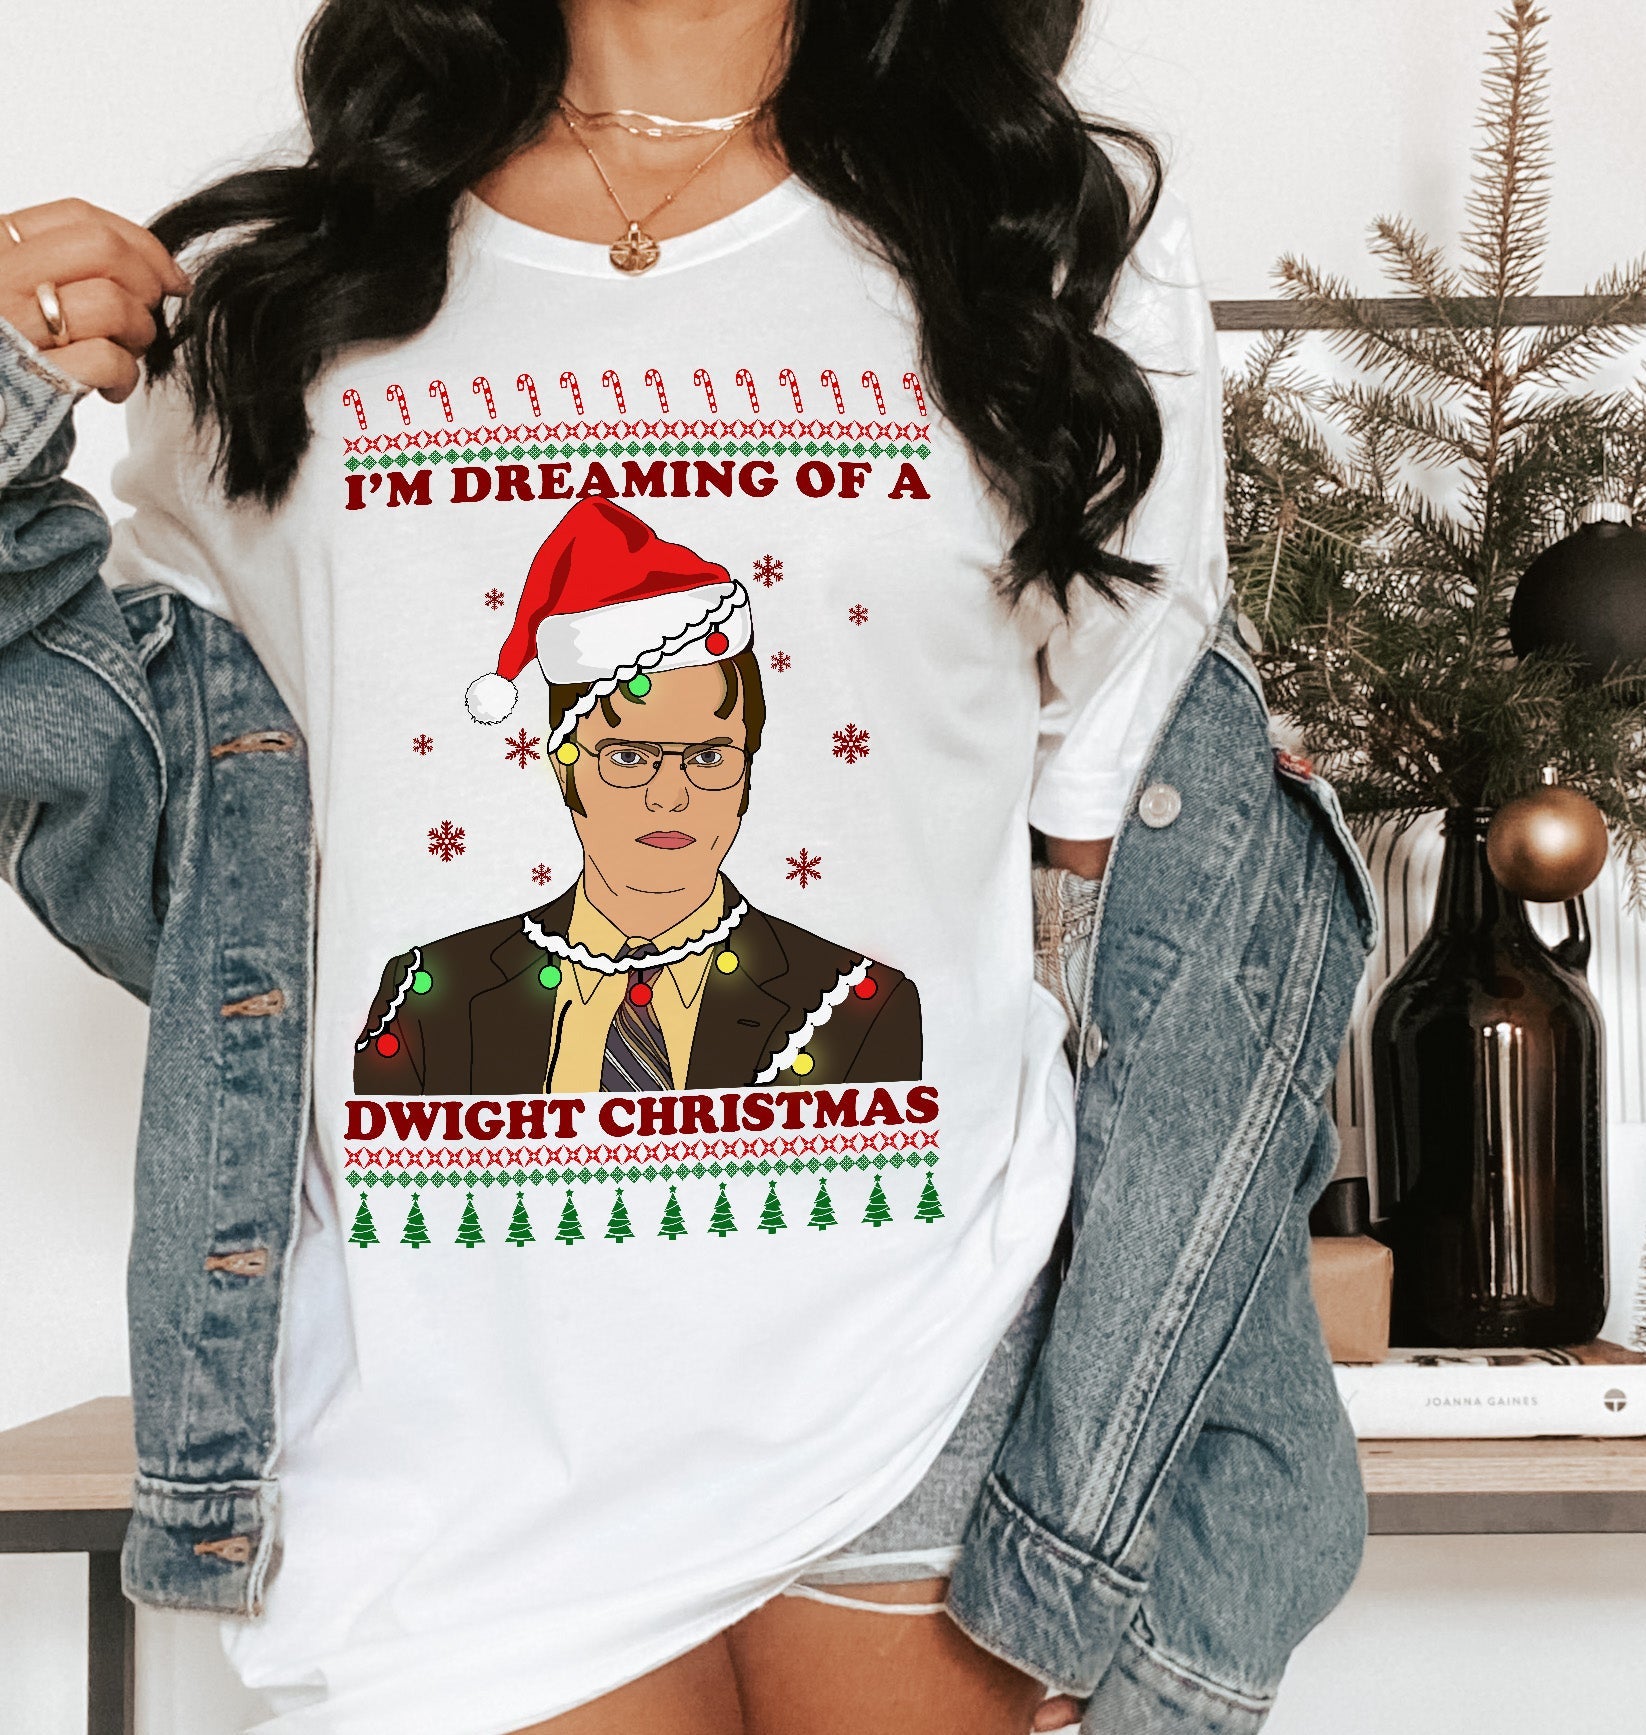 The office christmas shirt that says I'm dreaming of a dwight christmas - HighCiti